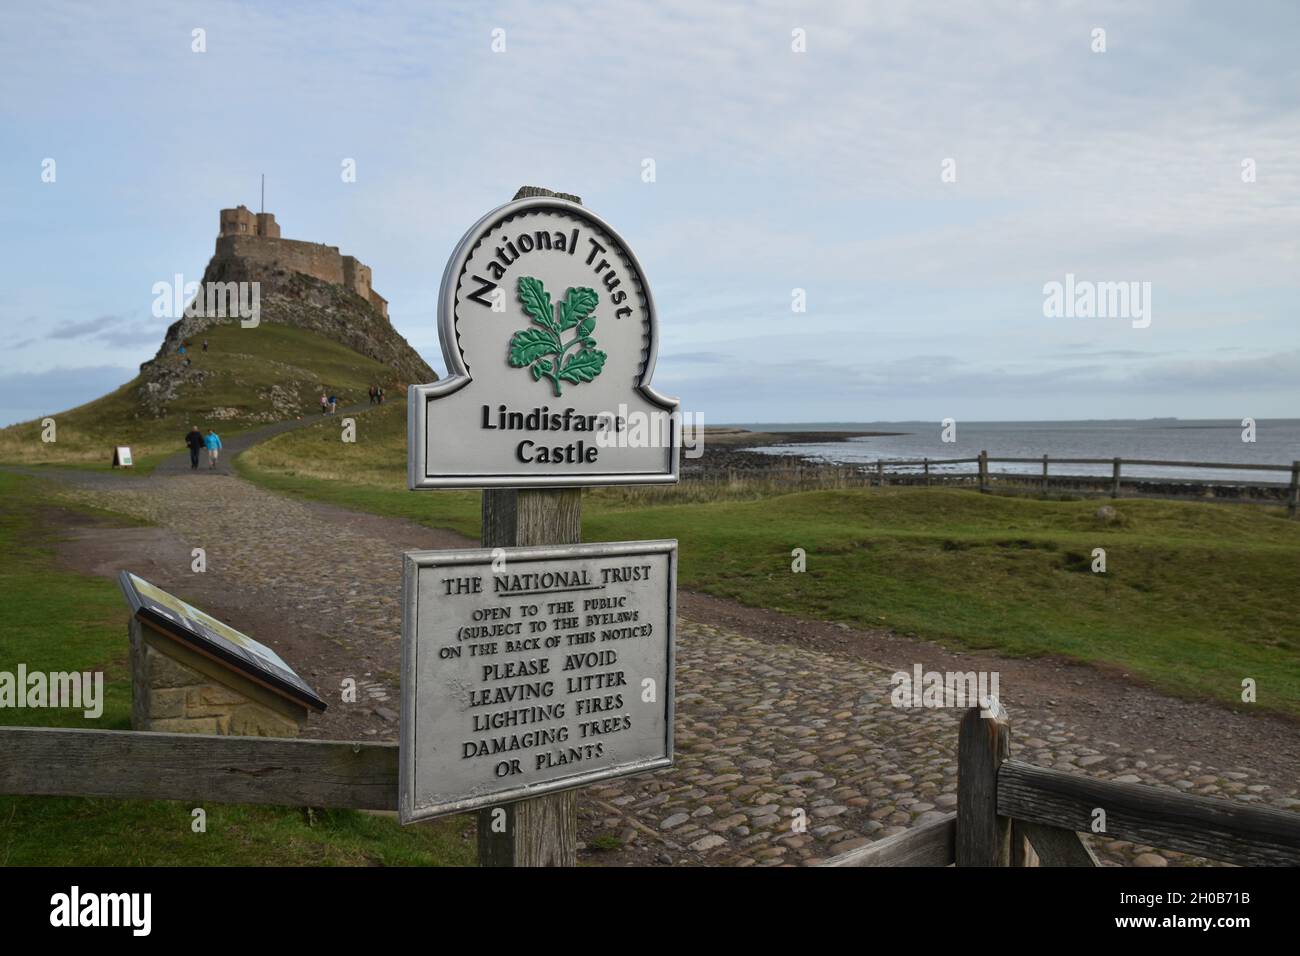 Sign for Lindisfarne Castle with blurred background of path, castle and blue sky with clouds. Shallow depth of field. Stock Photo